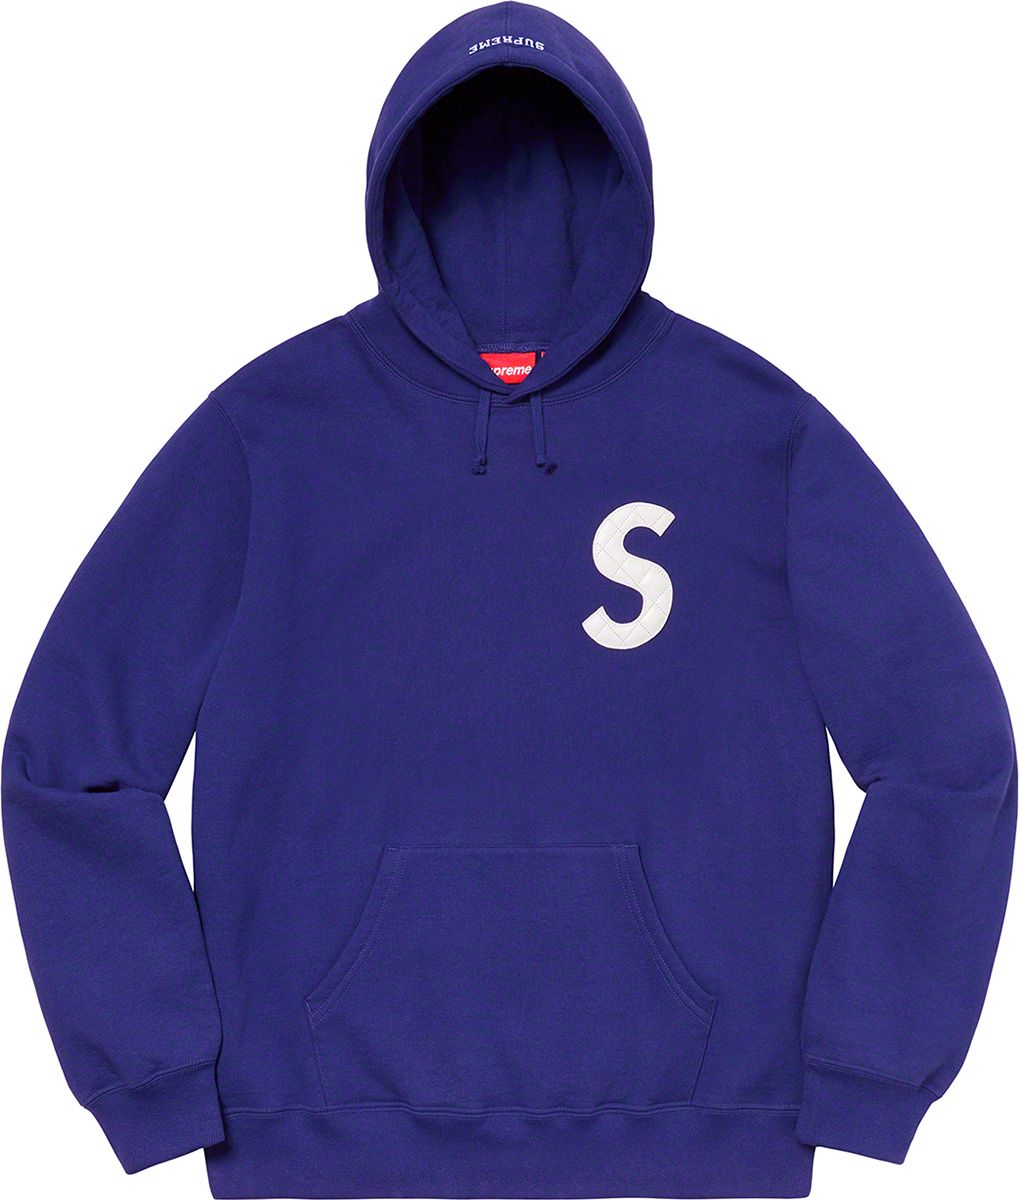 Cutout Letters Hooded Sweatshirt - Spring/Summer 2020 Preview 